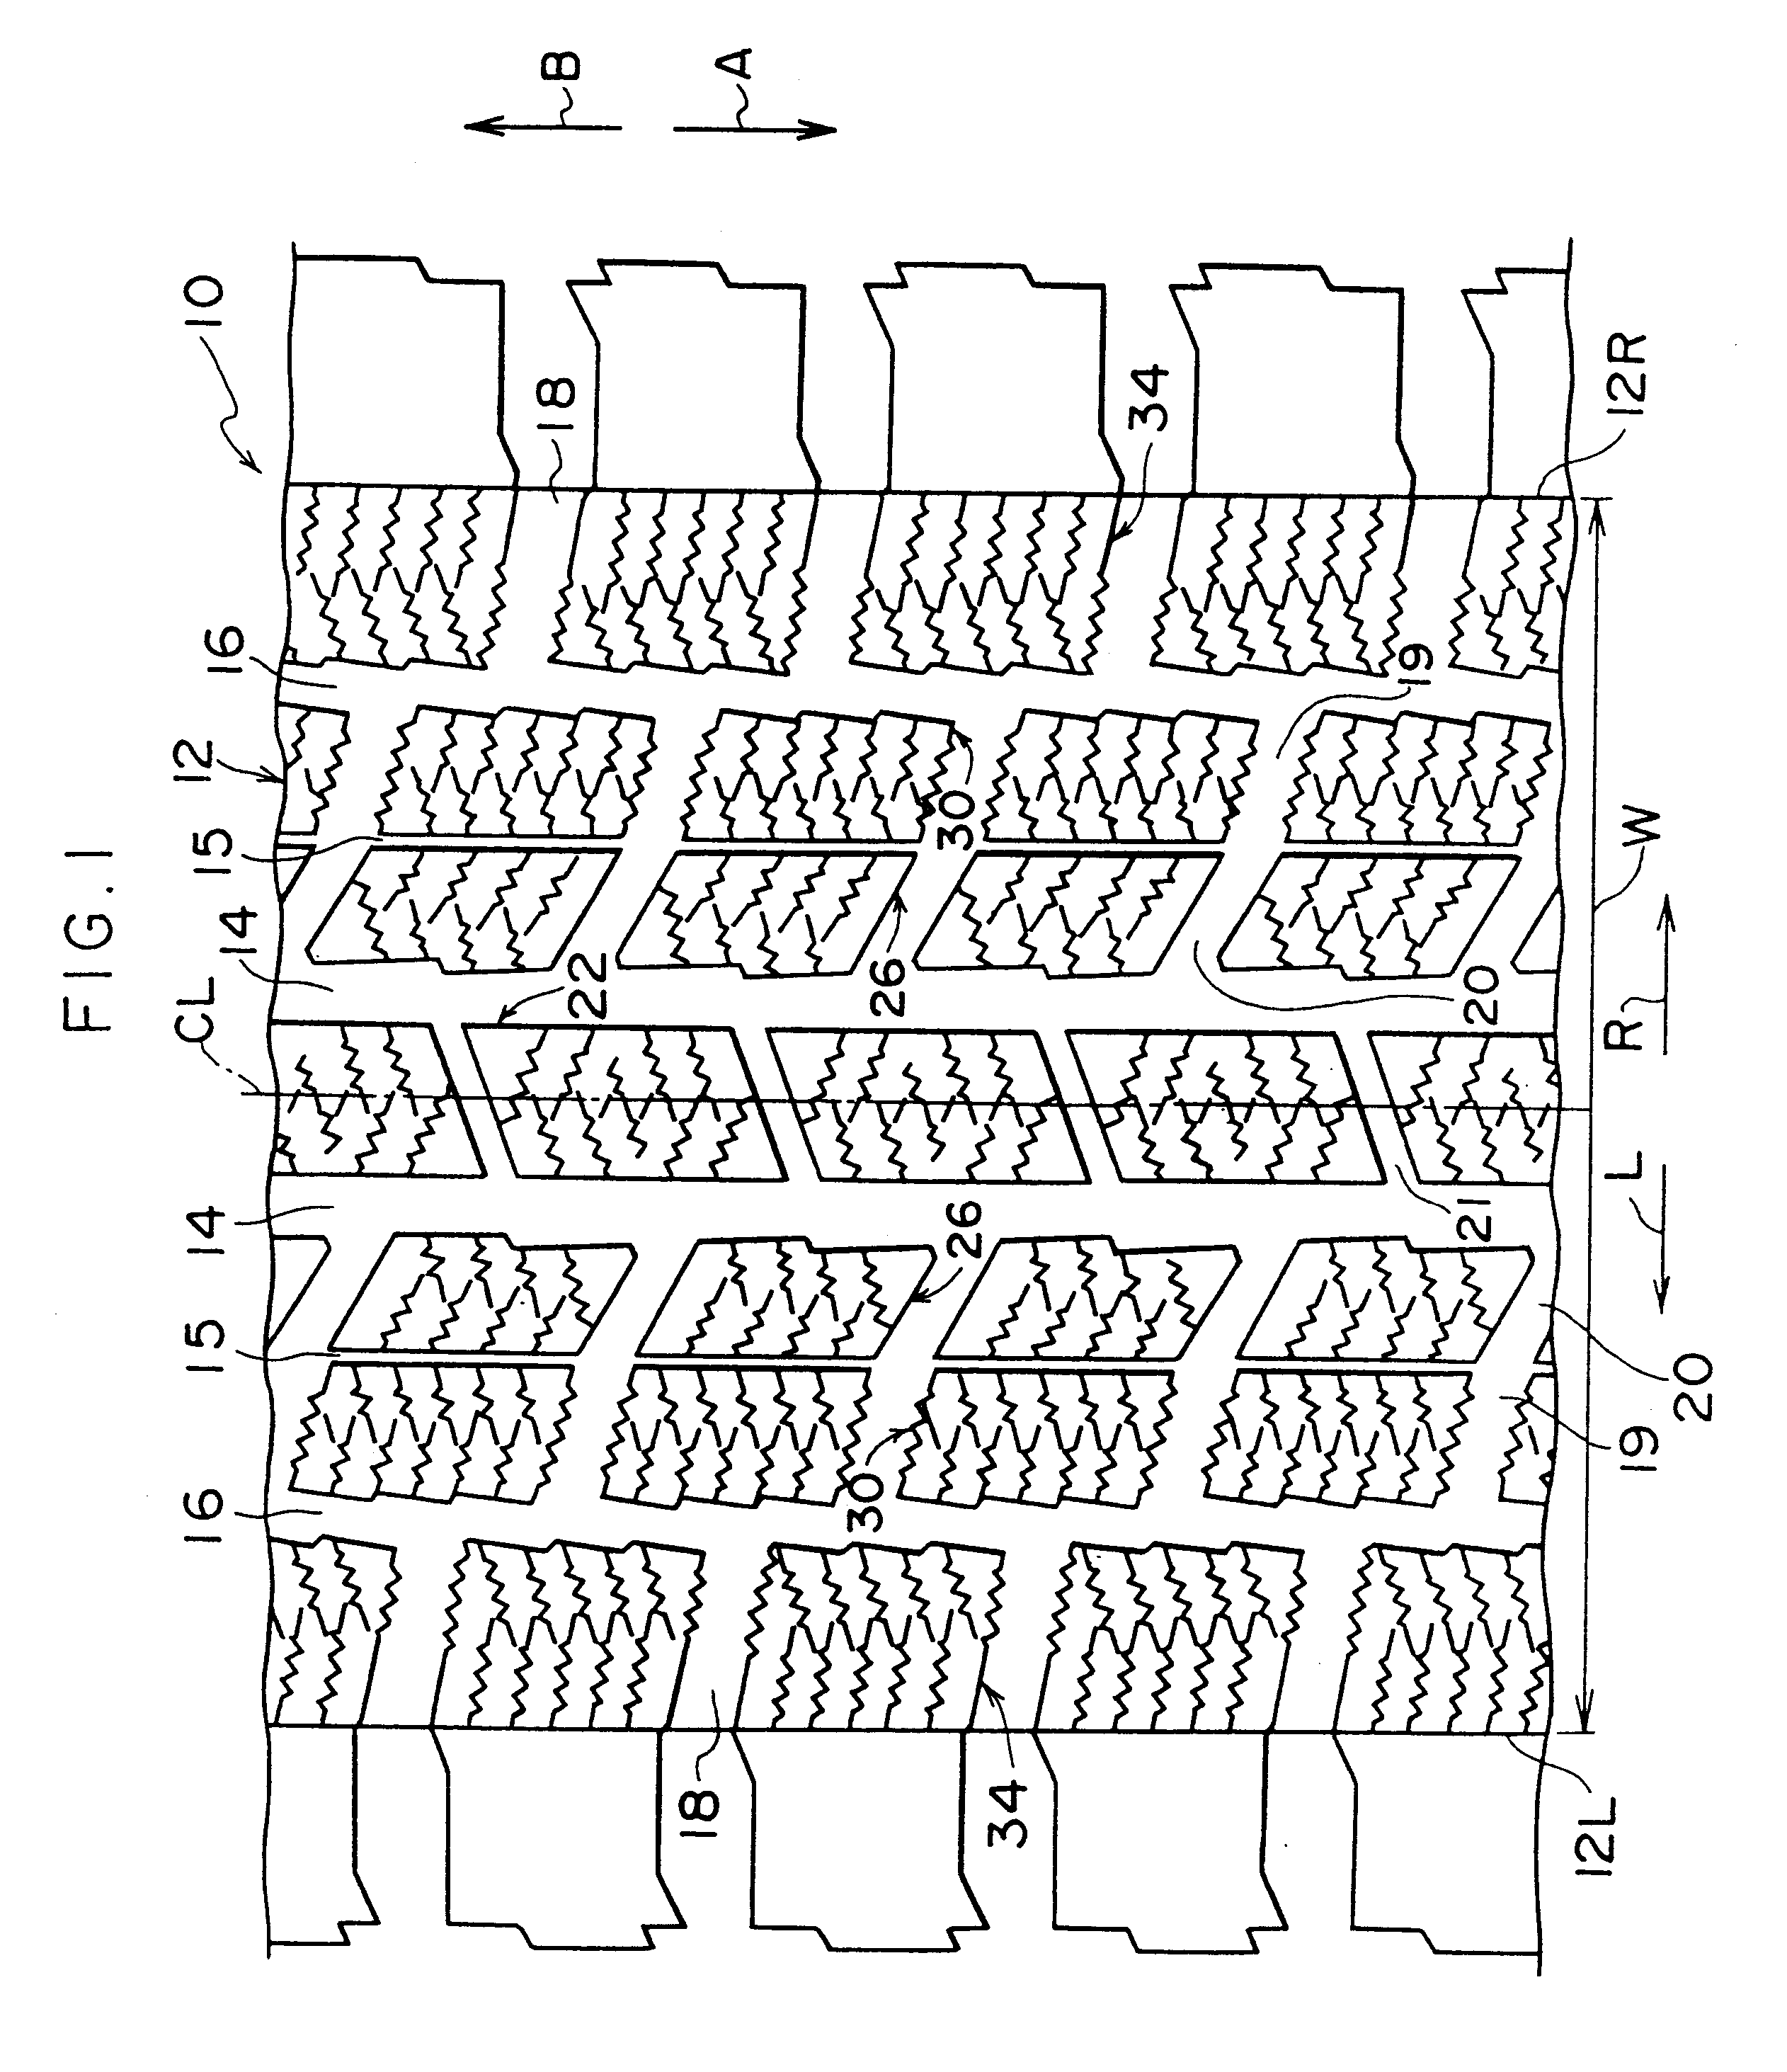 Pneumatic tire having tread including pairs of sipes